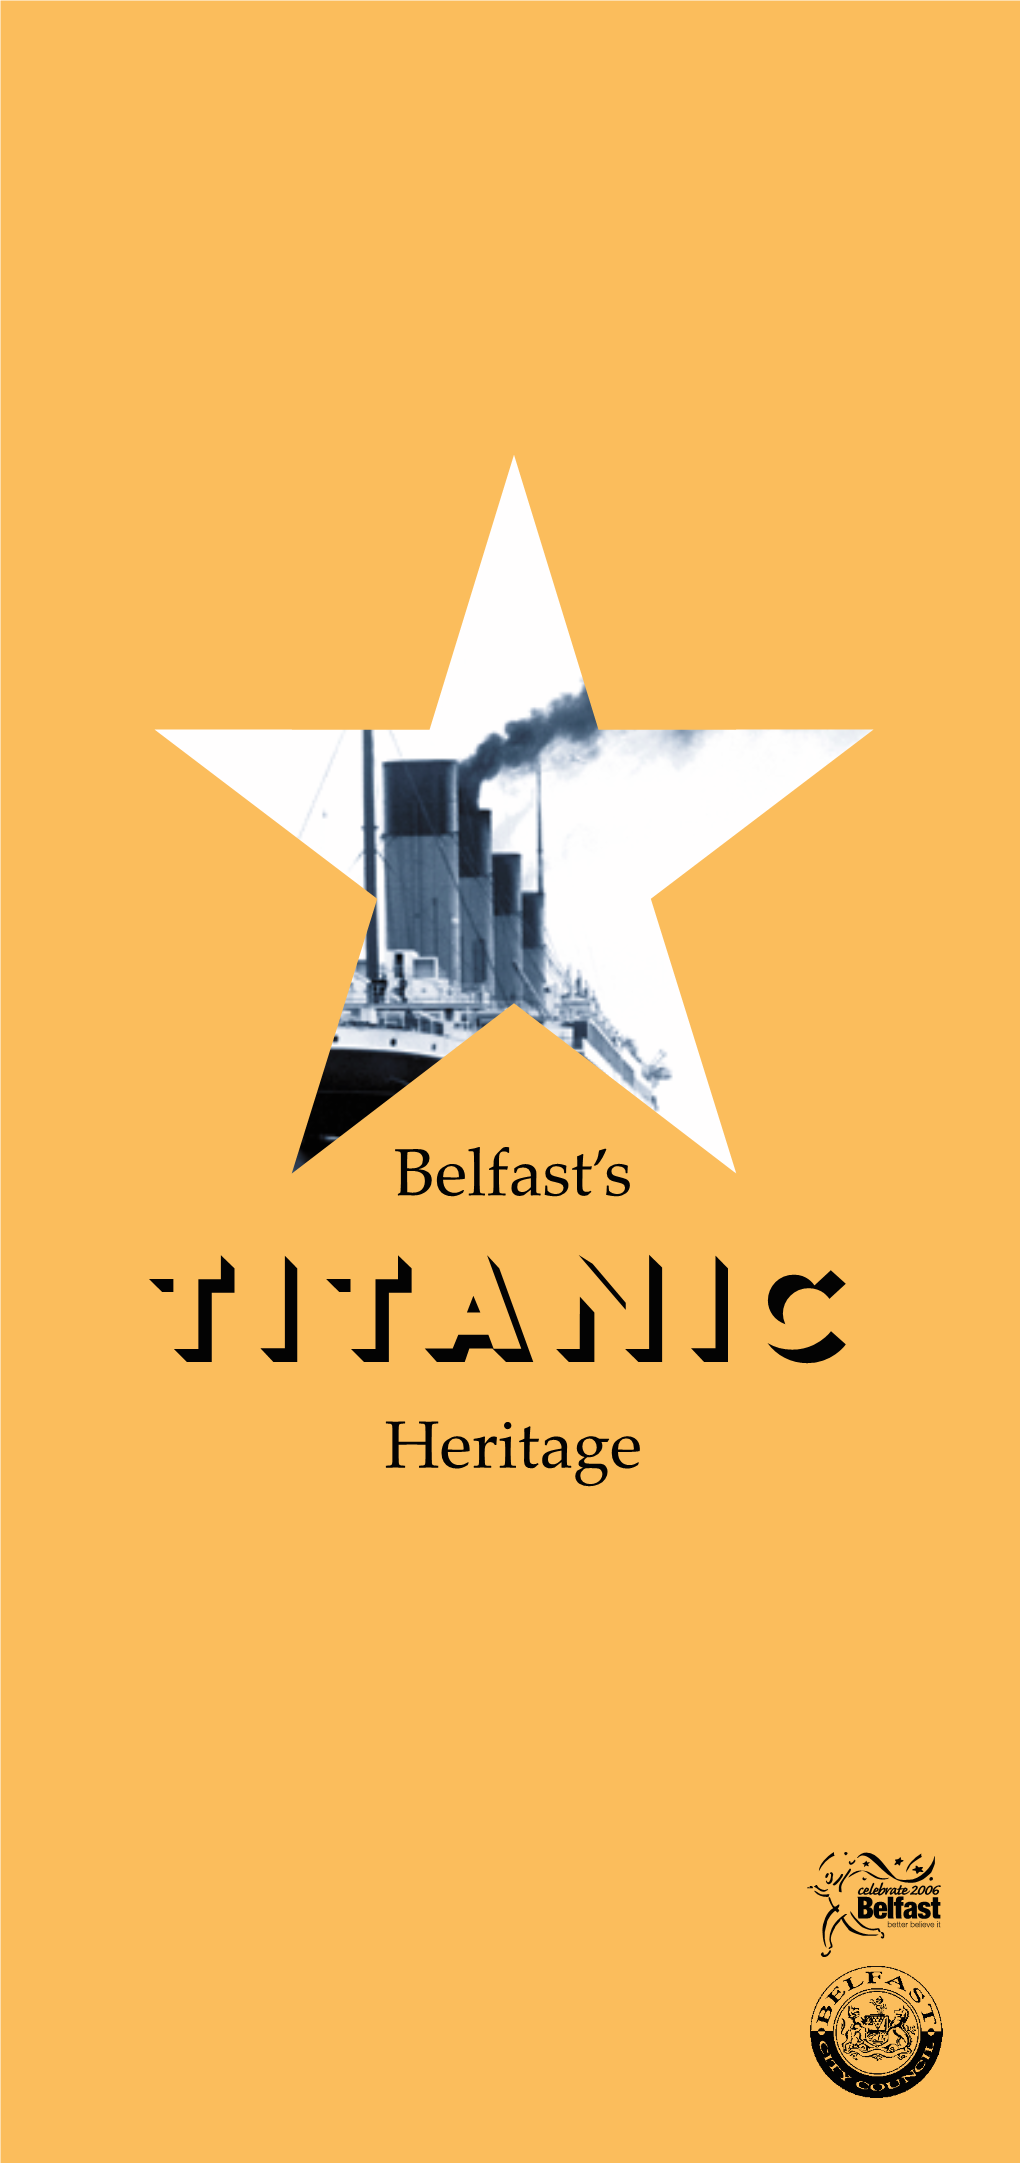 TITANIC Heritage Harland and When RMS Titanic Sailed Away on Her Maiden Voyage on April 10Th, 1912, She Was Hailed As ‘The New Wonder of the World’